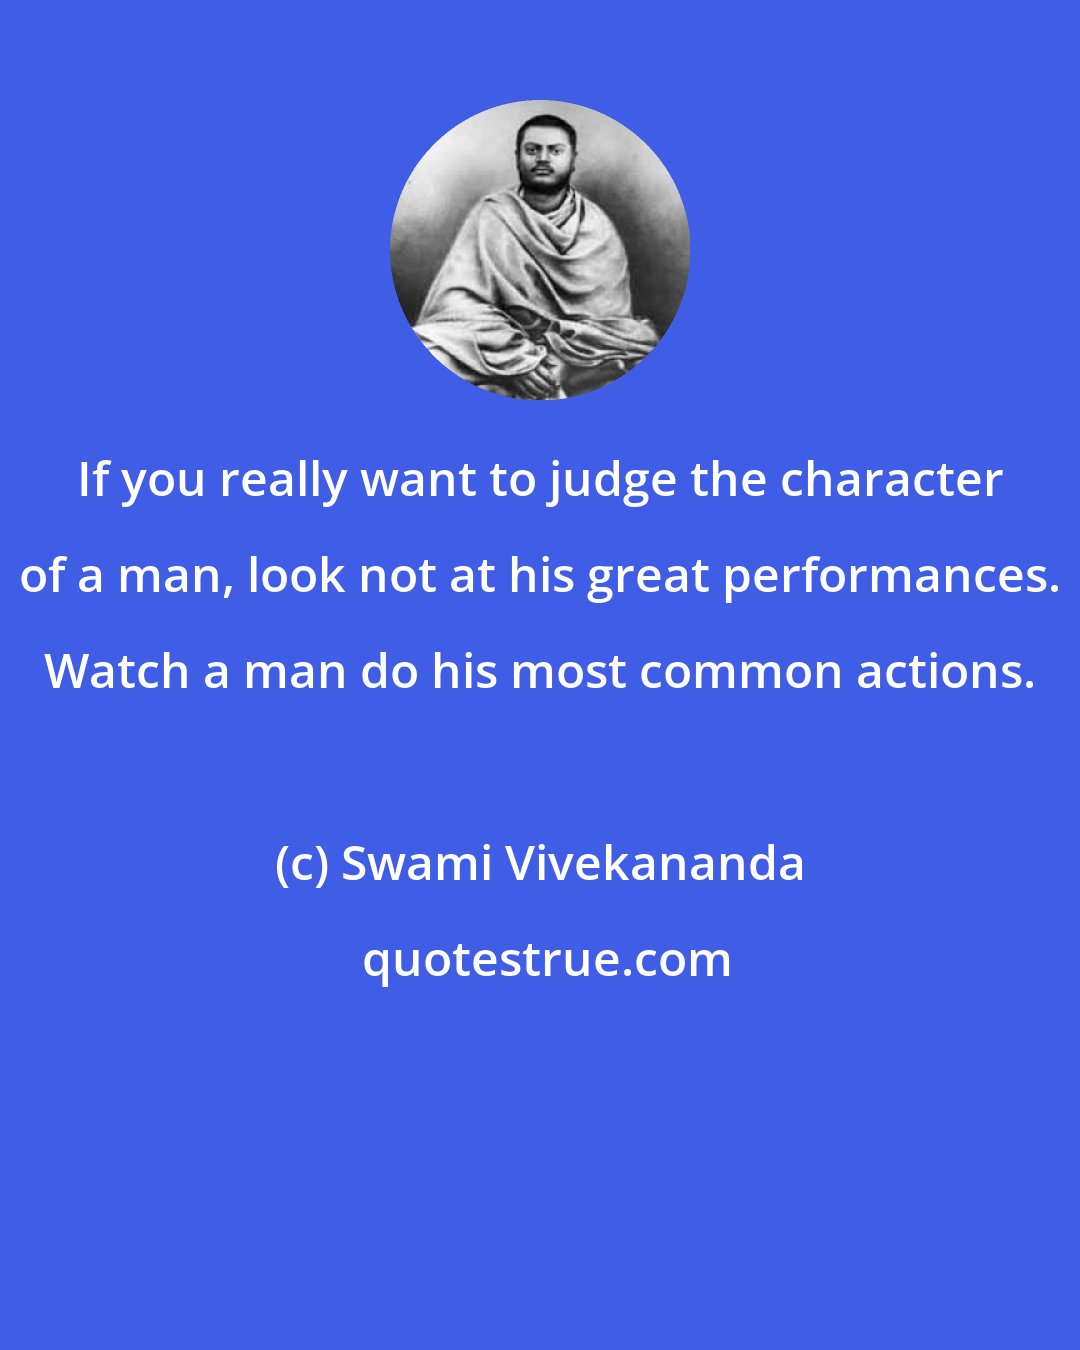 Swami Vivekananda: If you really want to judge the character of a man, look not at his great performances. Watch a man do his most common actions.